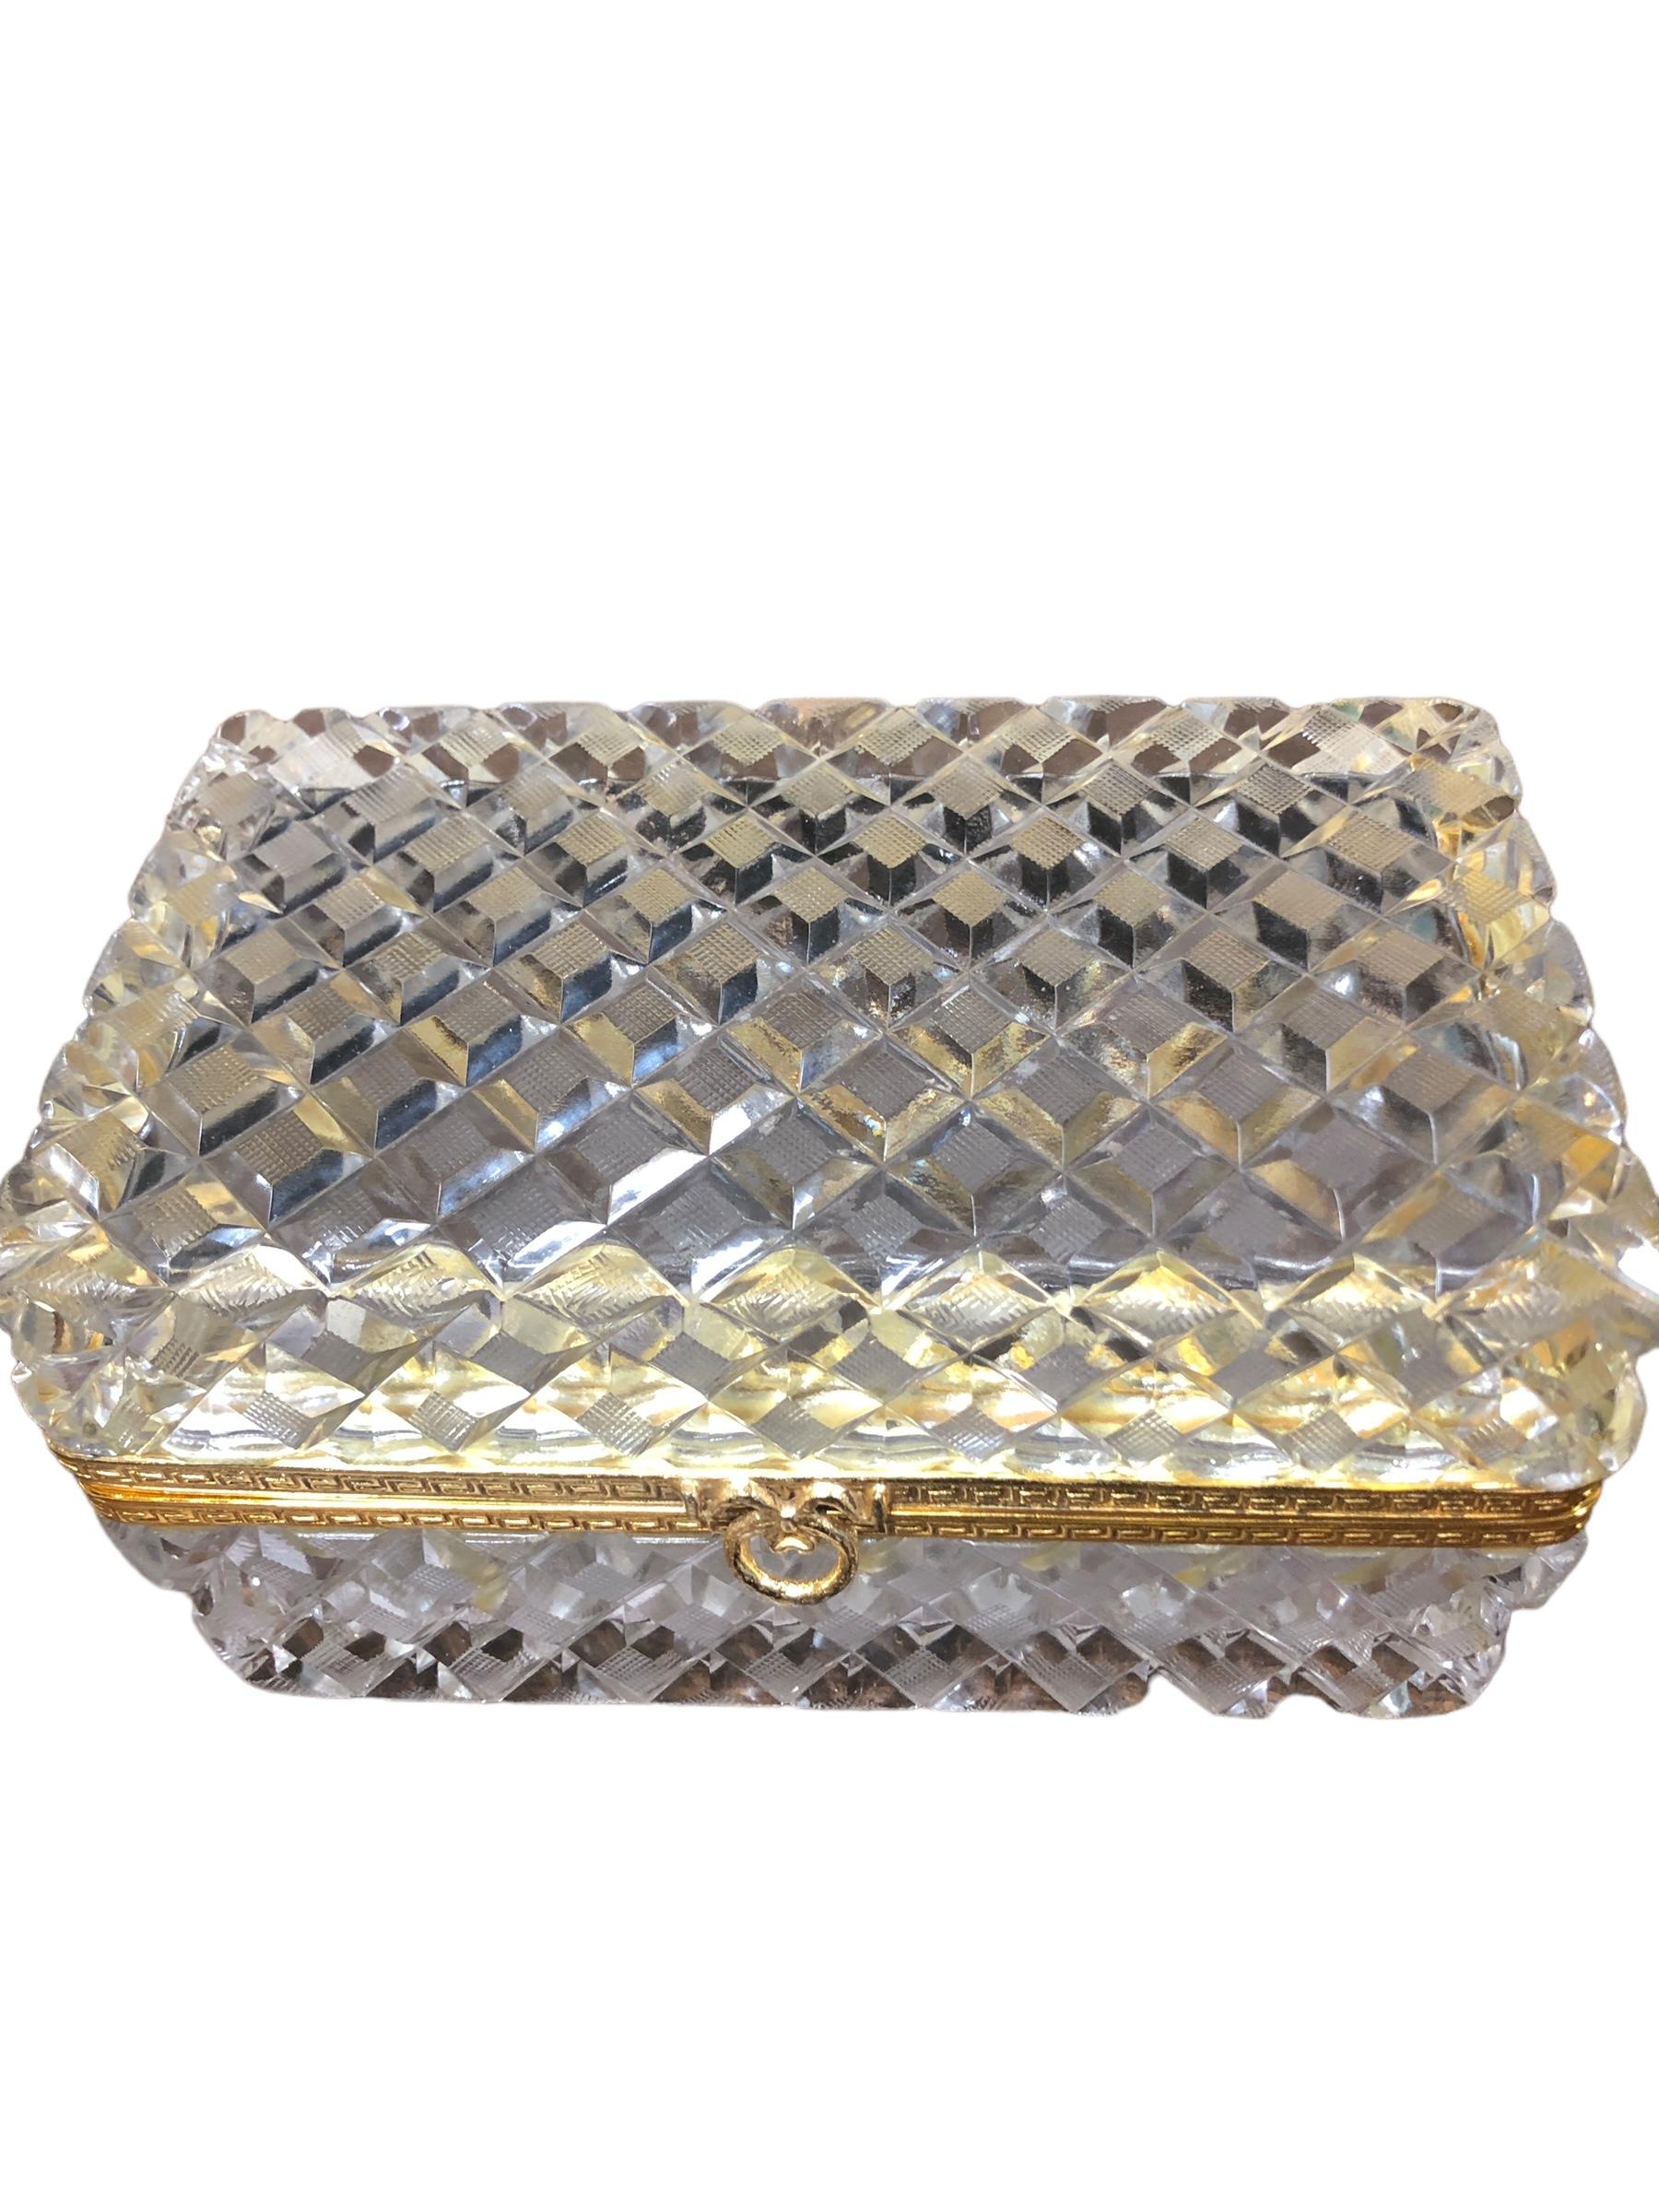 Large Cut Crystal Box with Gilt Bronze Mounts. Exceptionally large size makes this piece ideal for a number of different uses.